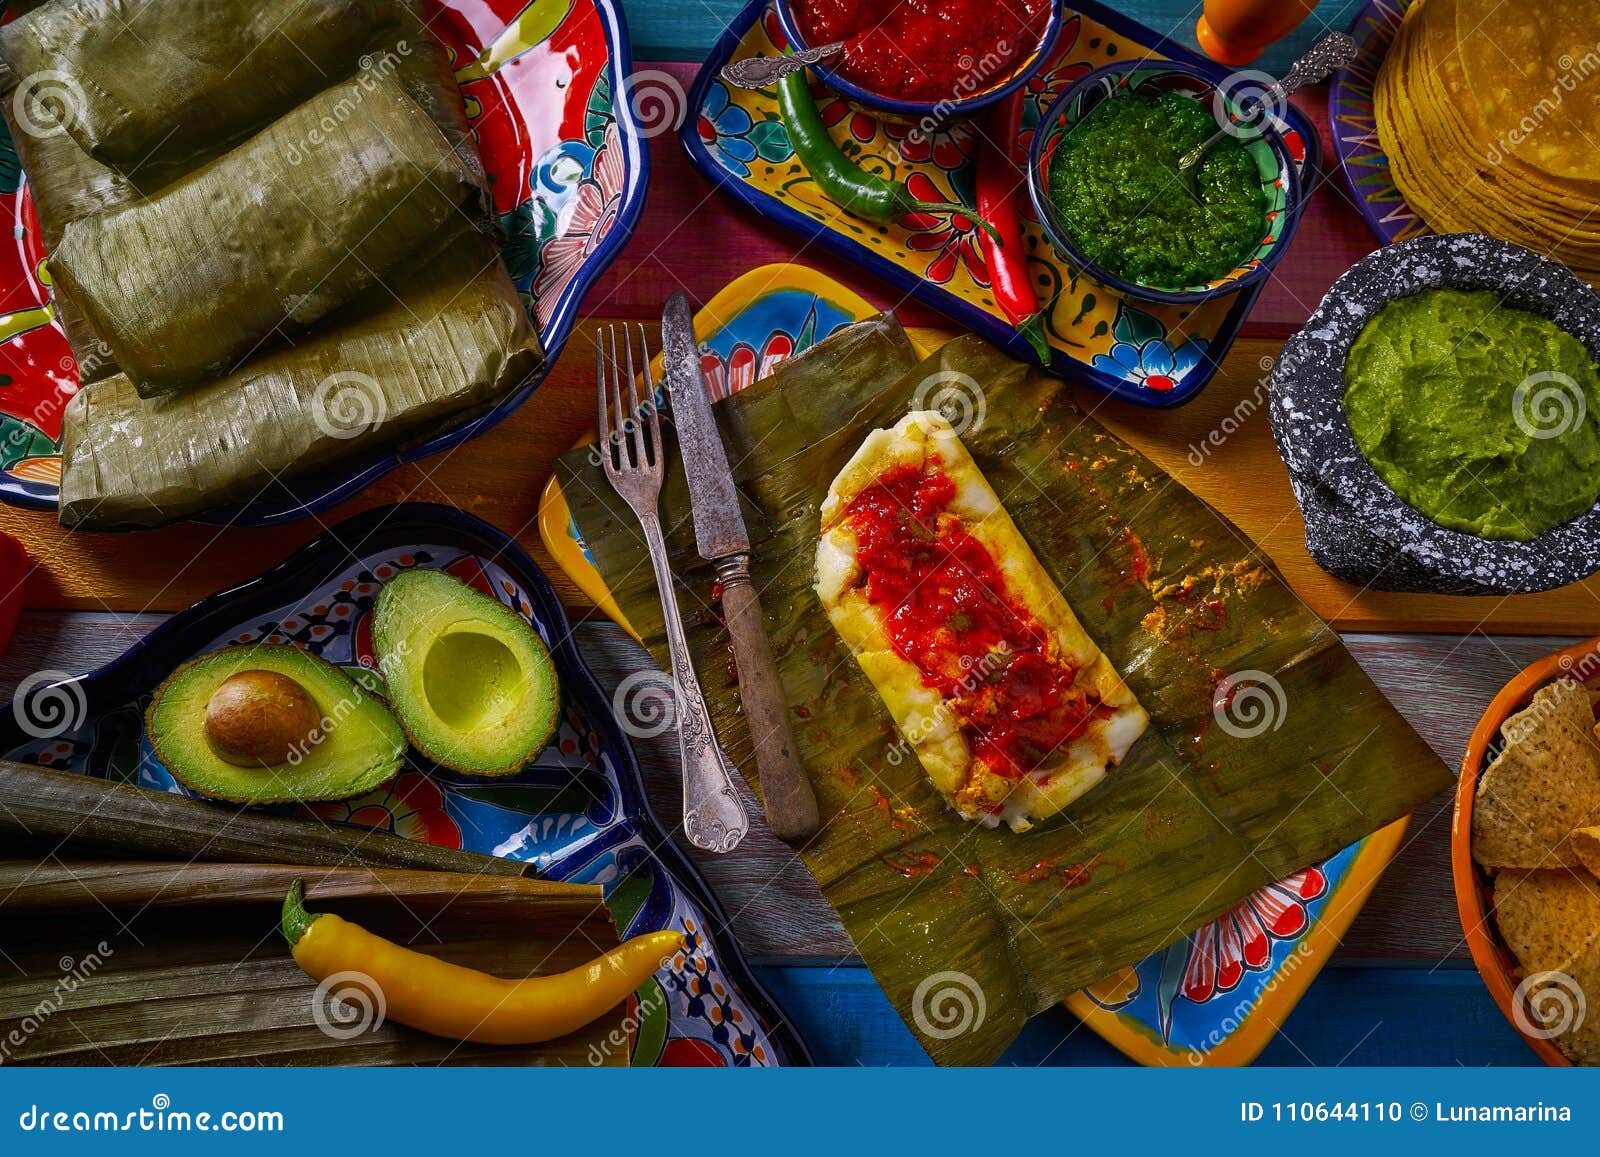 tamale mexican recipe with banana leaves